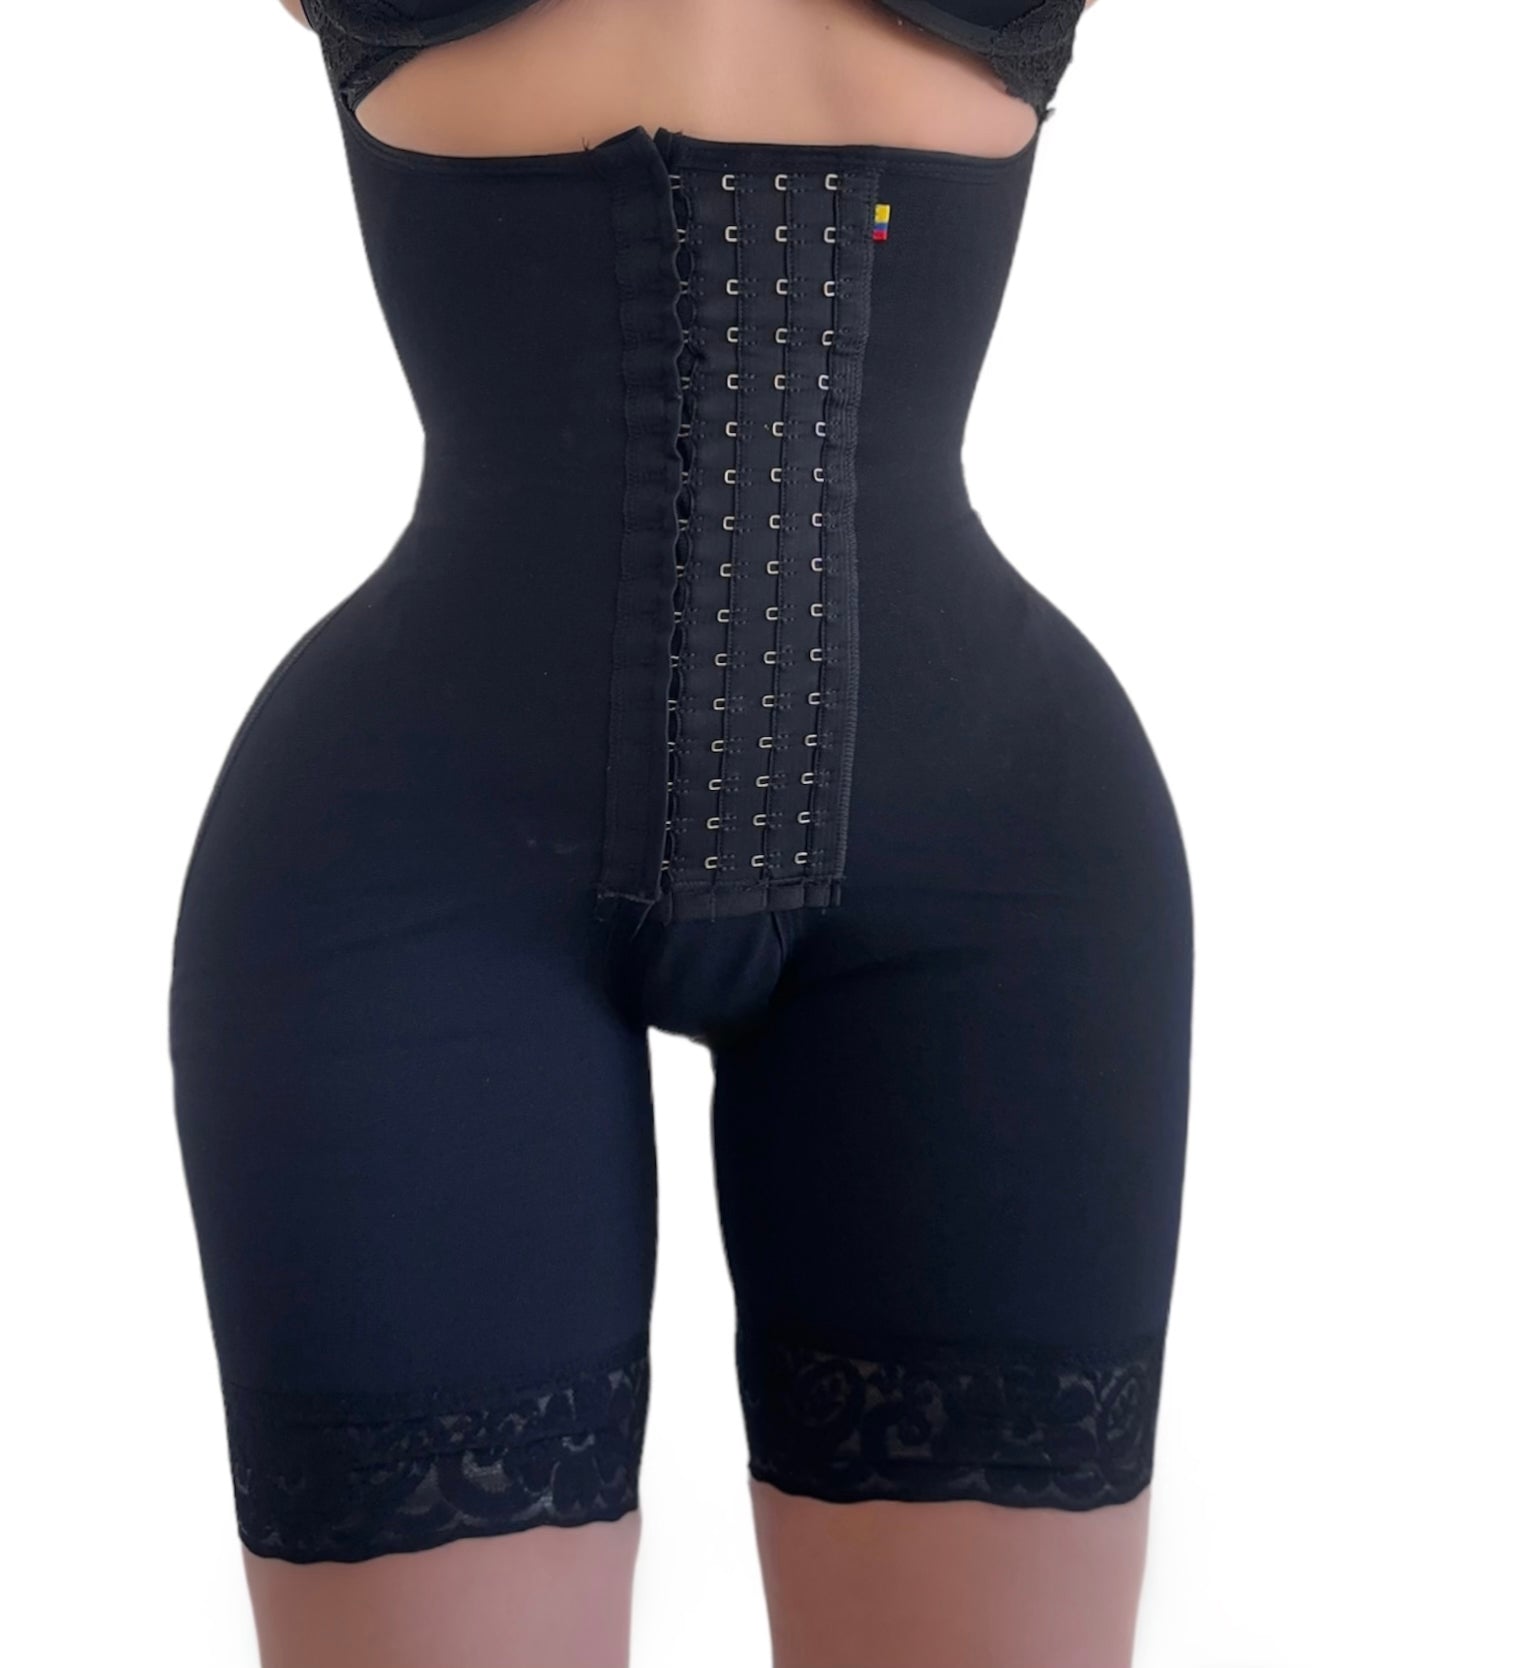 Plus Size Butt Lifter Body Shaper With Tummy Control and Removable Straps -  Curvy 'n Cute